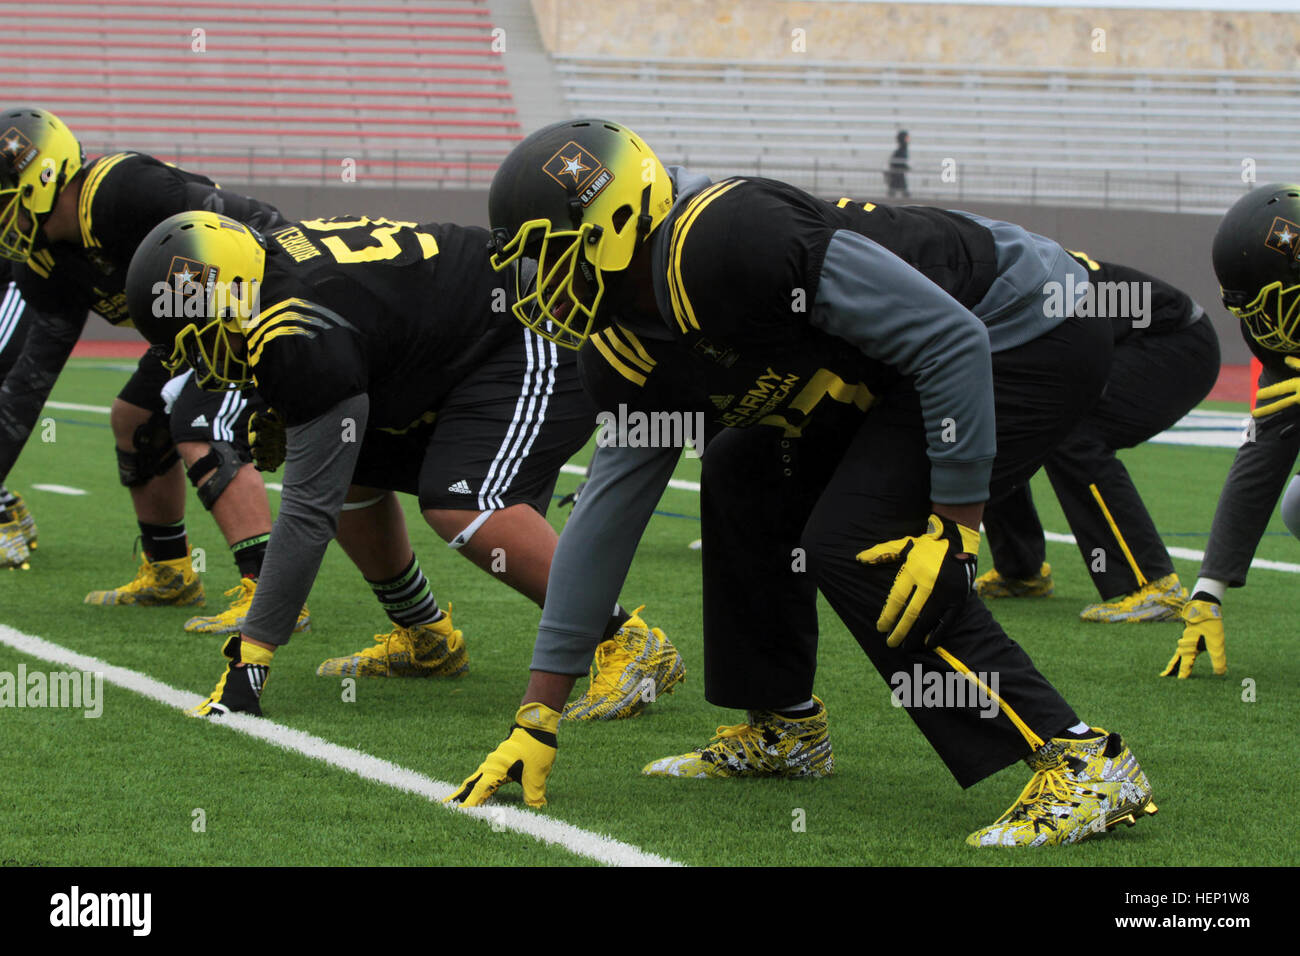 U.S. Army All-American Bowl East team offensive linemen prepare for a snap during drill, New Year's Day at Alamo Stadium in San Antonio. The practice, conducted amid swirling winds, rain, and bitter cold, was in preparation for the Army Bowl game on Jan. 3, 2015, in the Alamo Dome. This year marks the 15th anniversary of the Army All-American Bowl held annually in San Antonio. The All-American Bowl pits 96 of the nation's top high school football players in an East-West grudge match. Players prep their positions 150101-A-GX635-803 Stock Photo